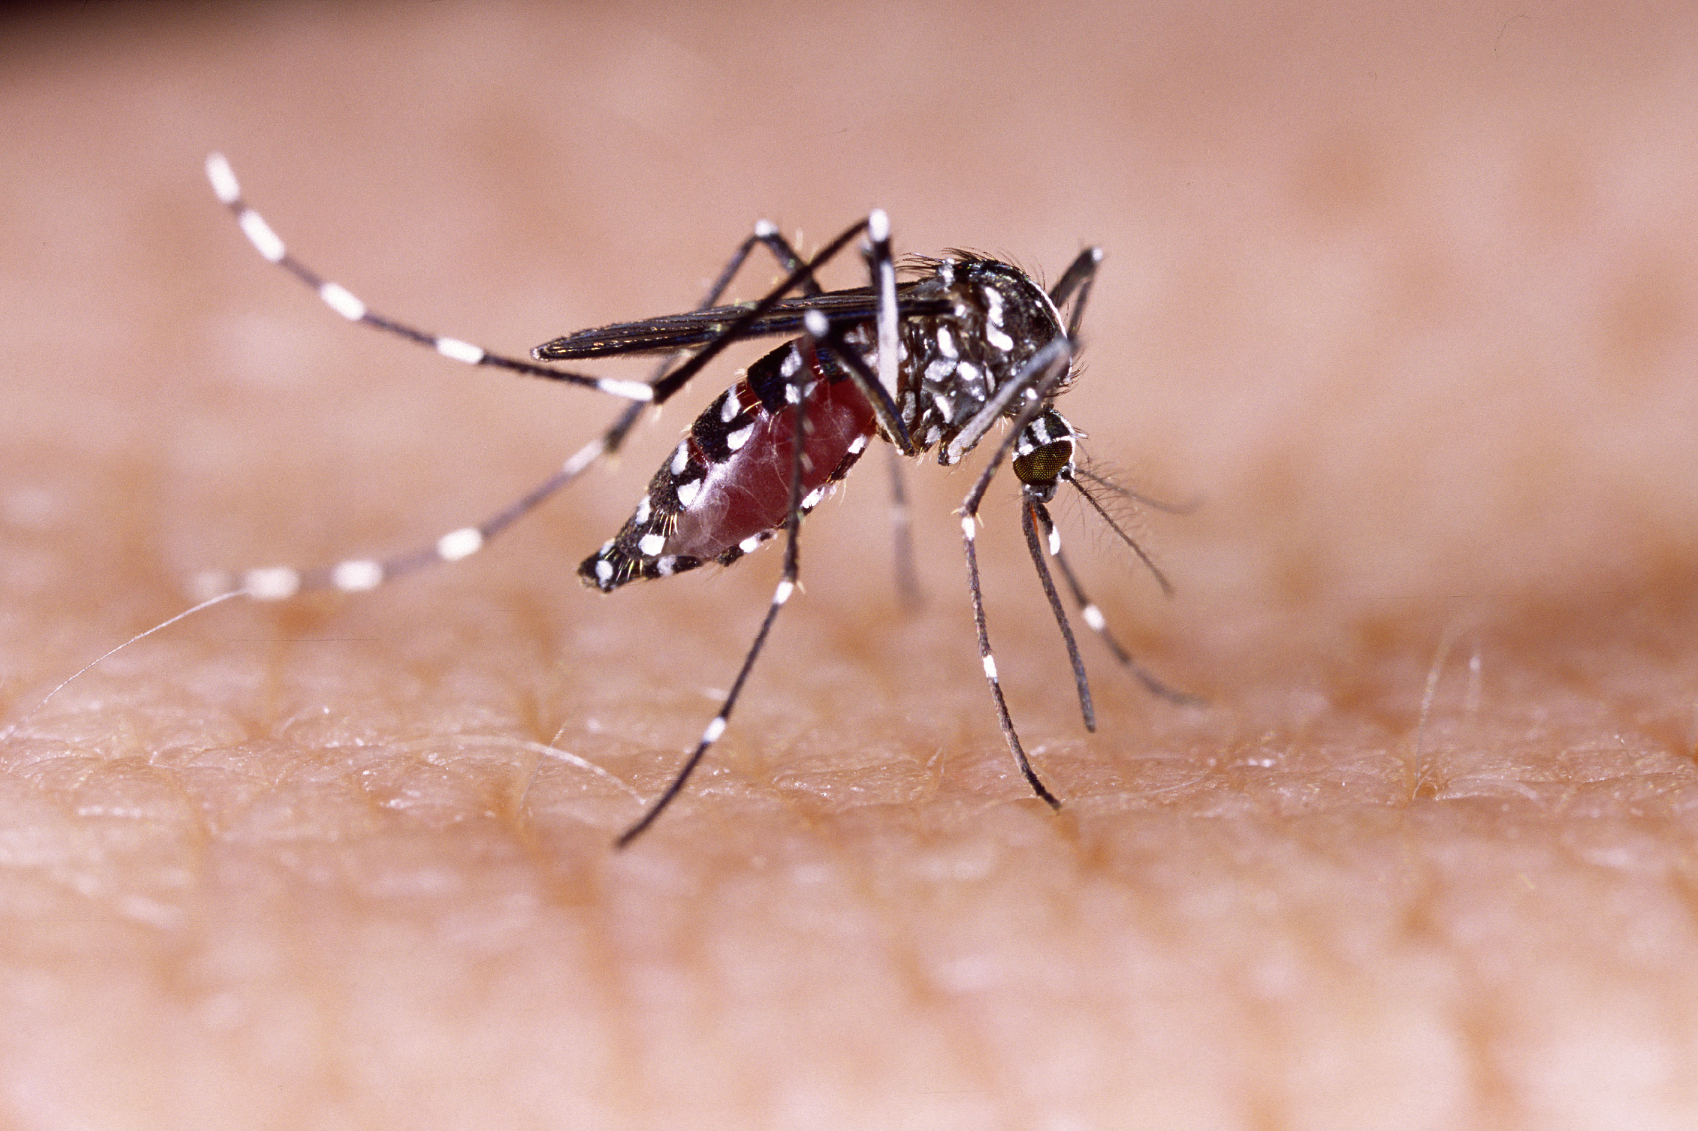 Here are five natural ways to prevent Zika infection.